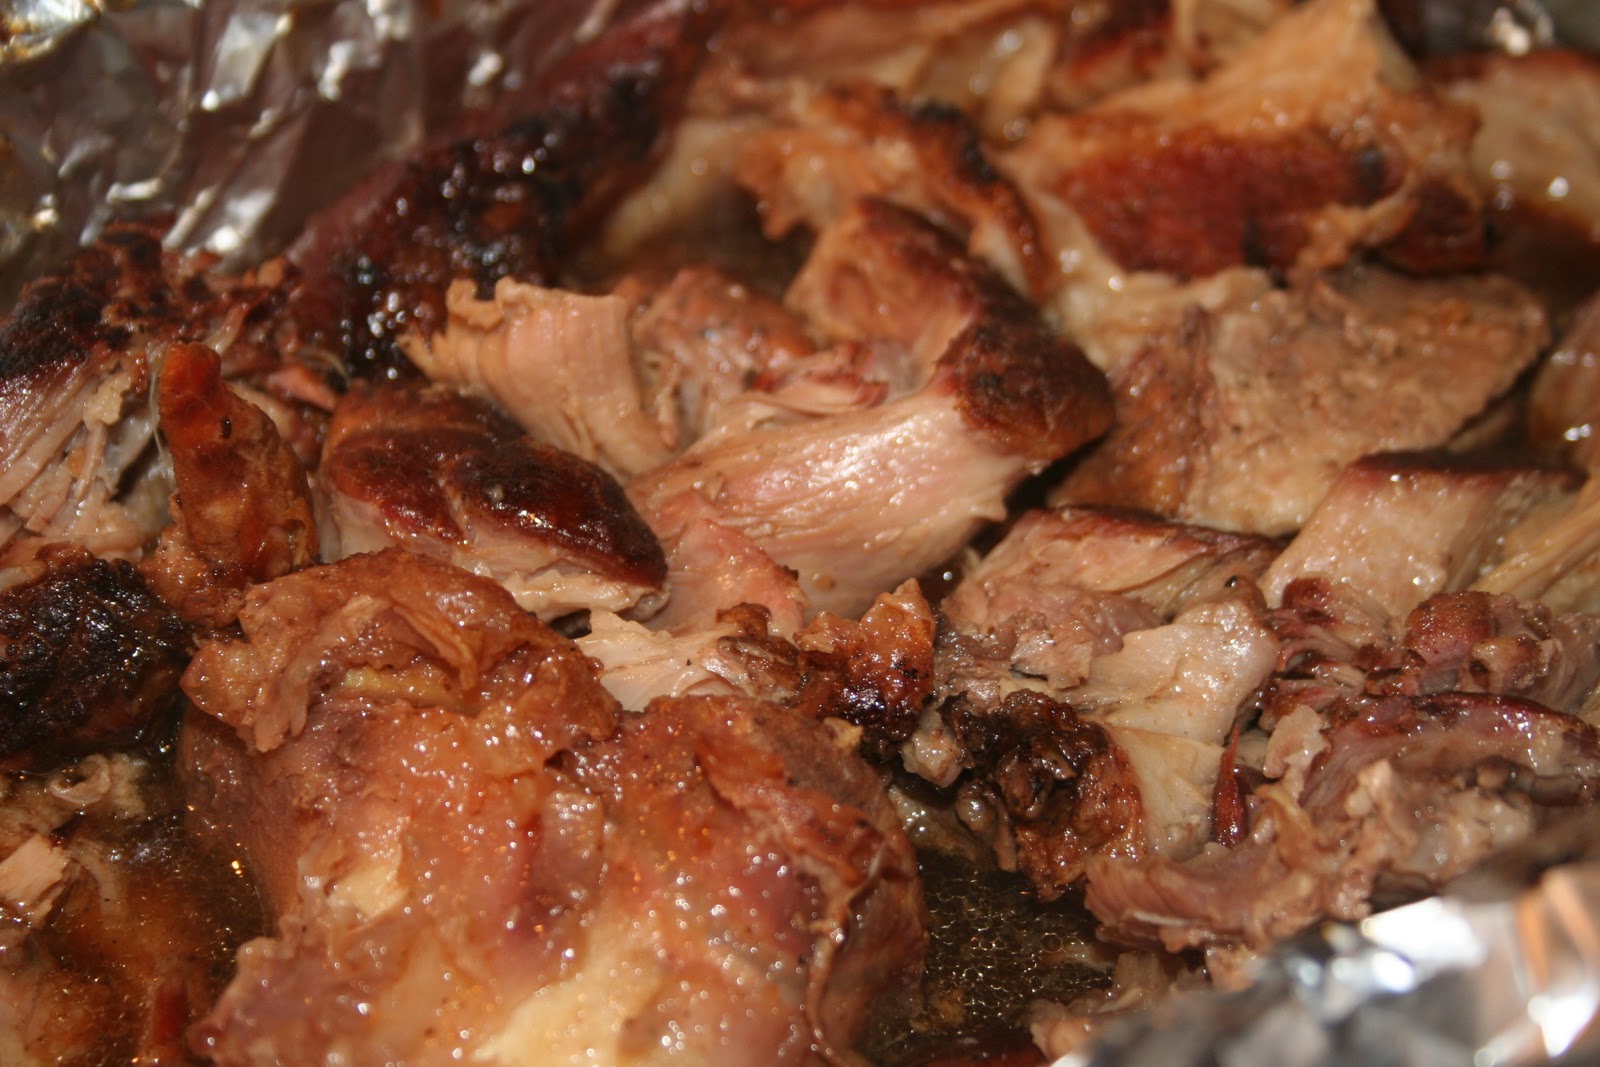 186 New pulled pork recipe oven 12 hours 666   pulled pork it was a delicious new twist on the traditional pork adobo 